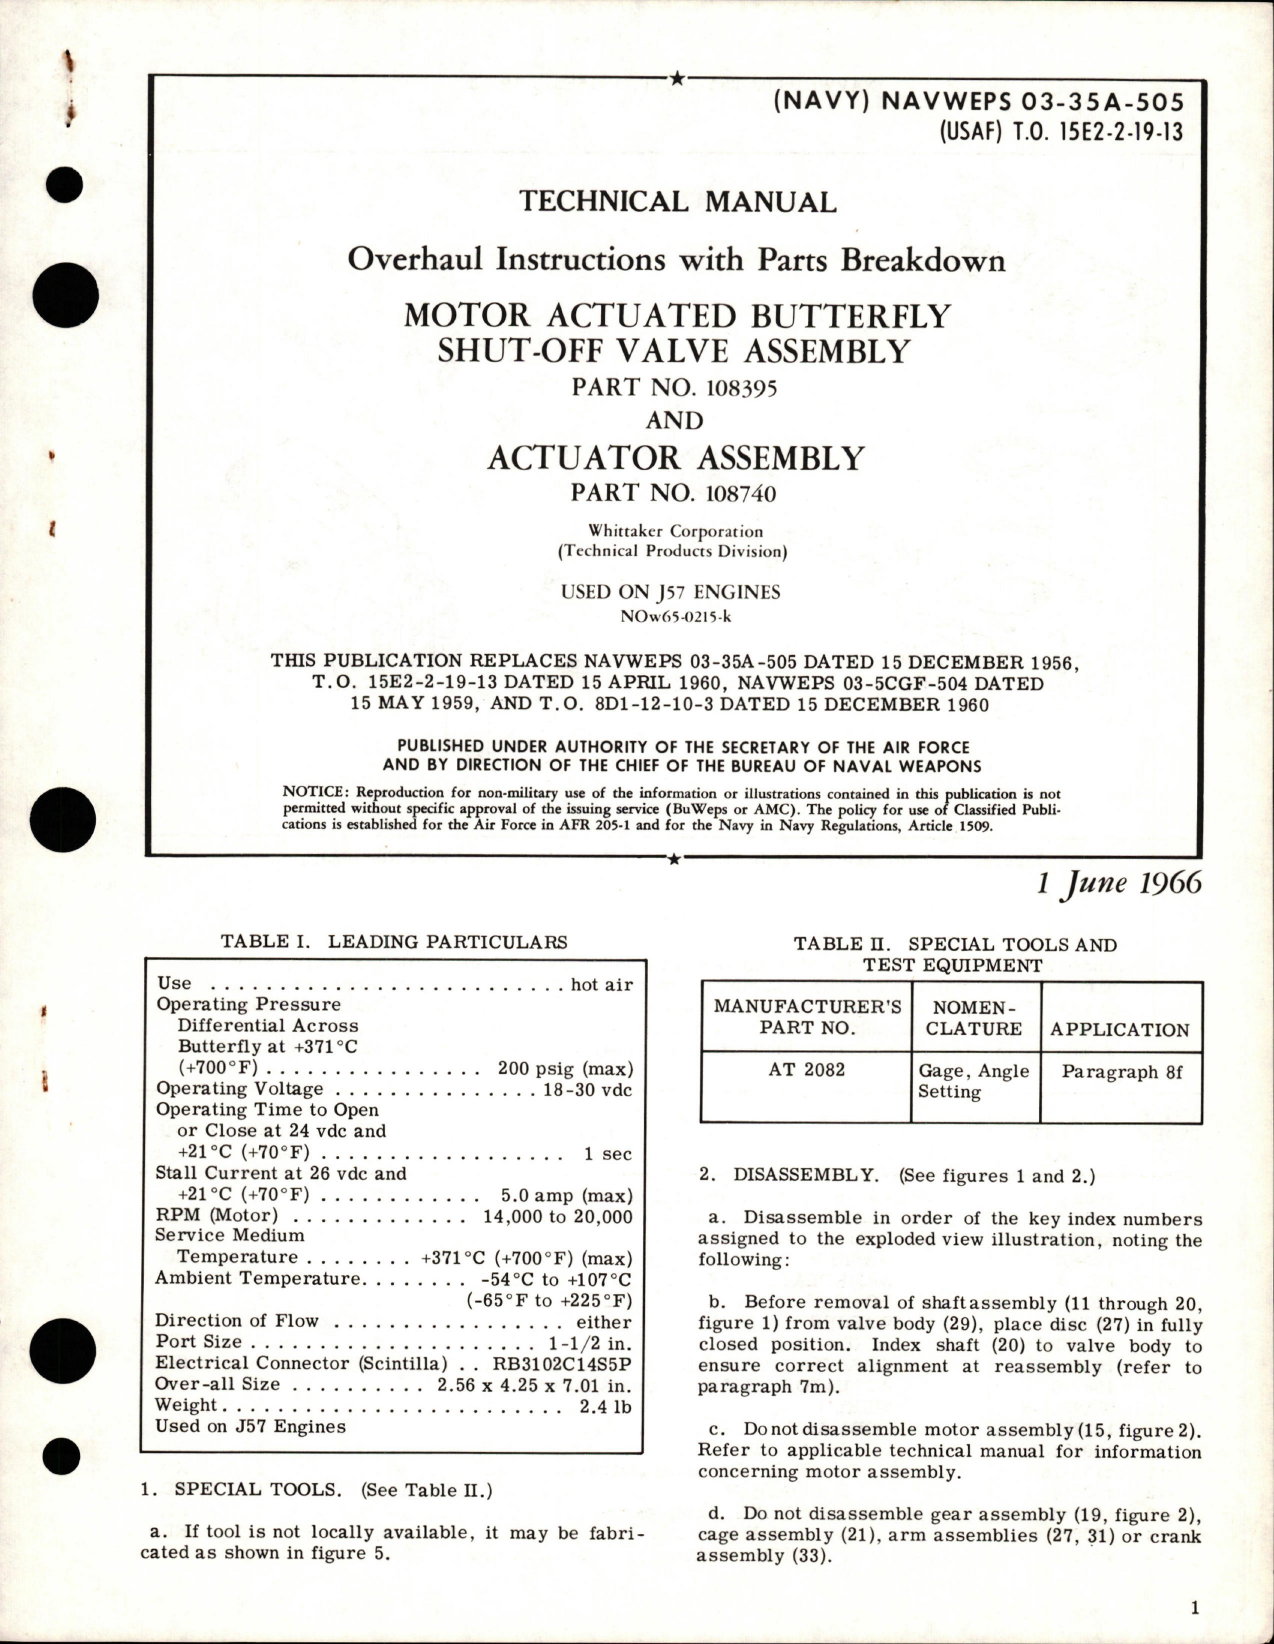 Sample page 1 from AirCorps Library document: Overhaul Instructions with Parts for Motor Actuated Butterfly Shut-Off Valve Assembly and Actuator Assembly - Parts 108395 and 108740